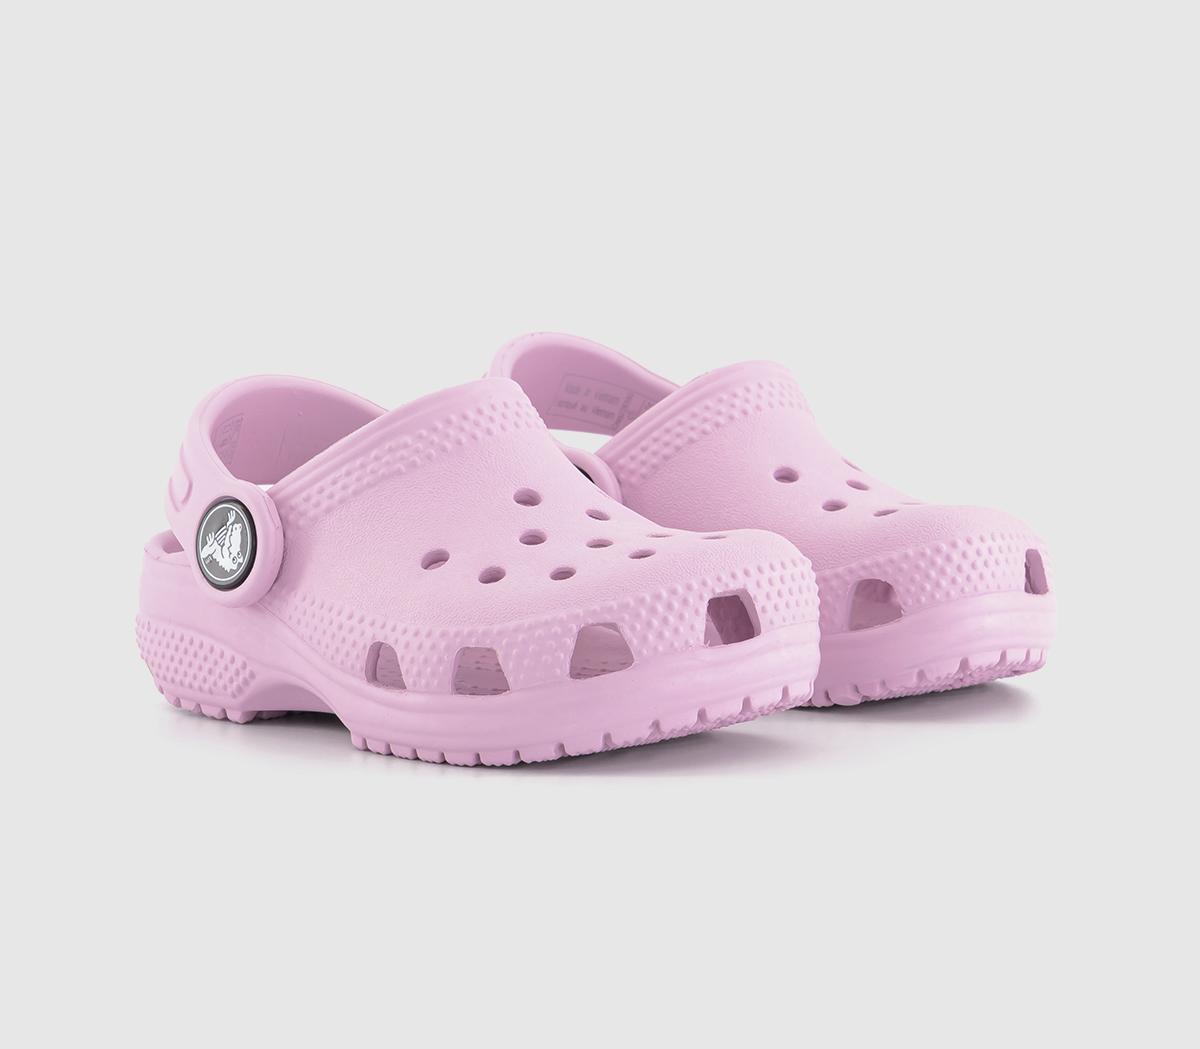 Crocs Classic Kids Clogs Ballerina Pink Synthetic, 9 Infant